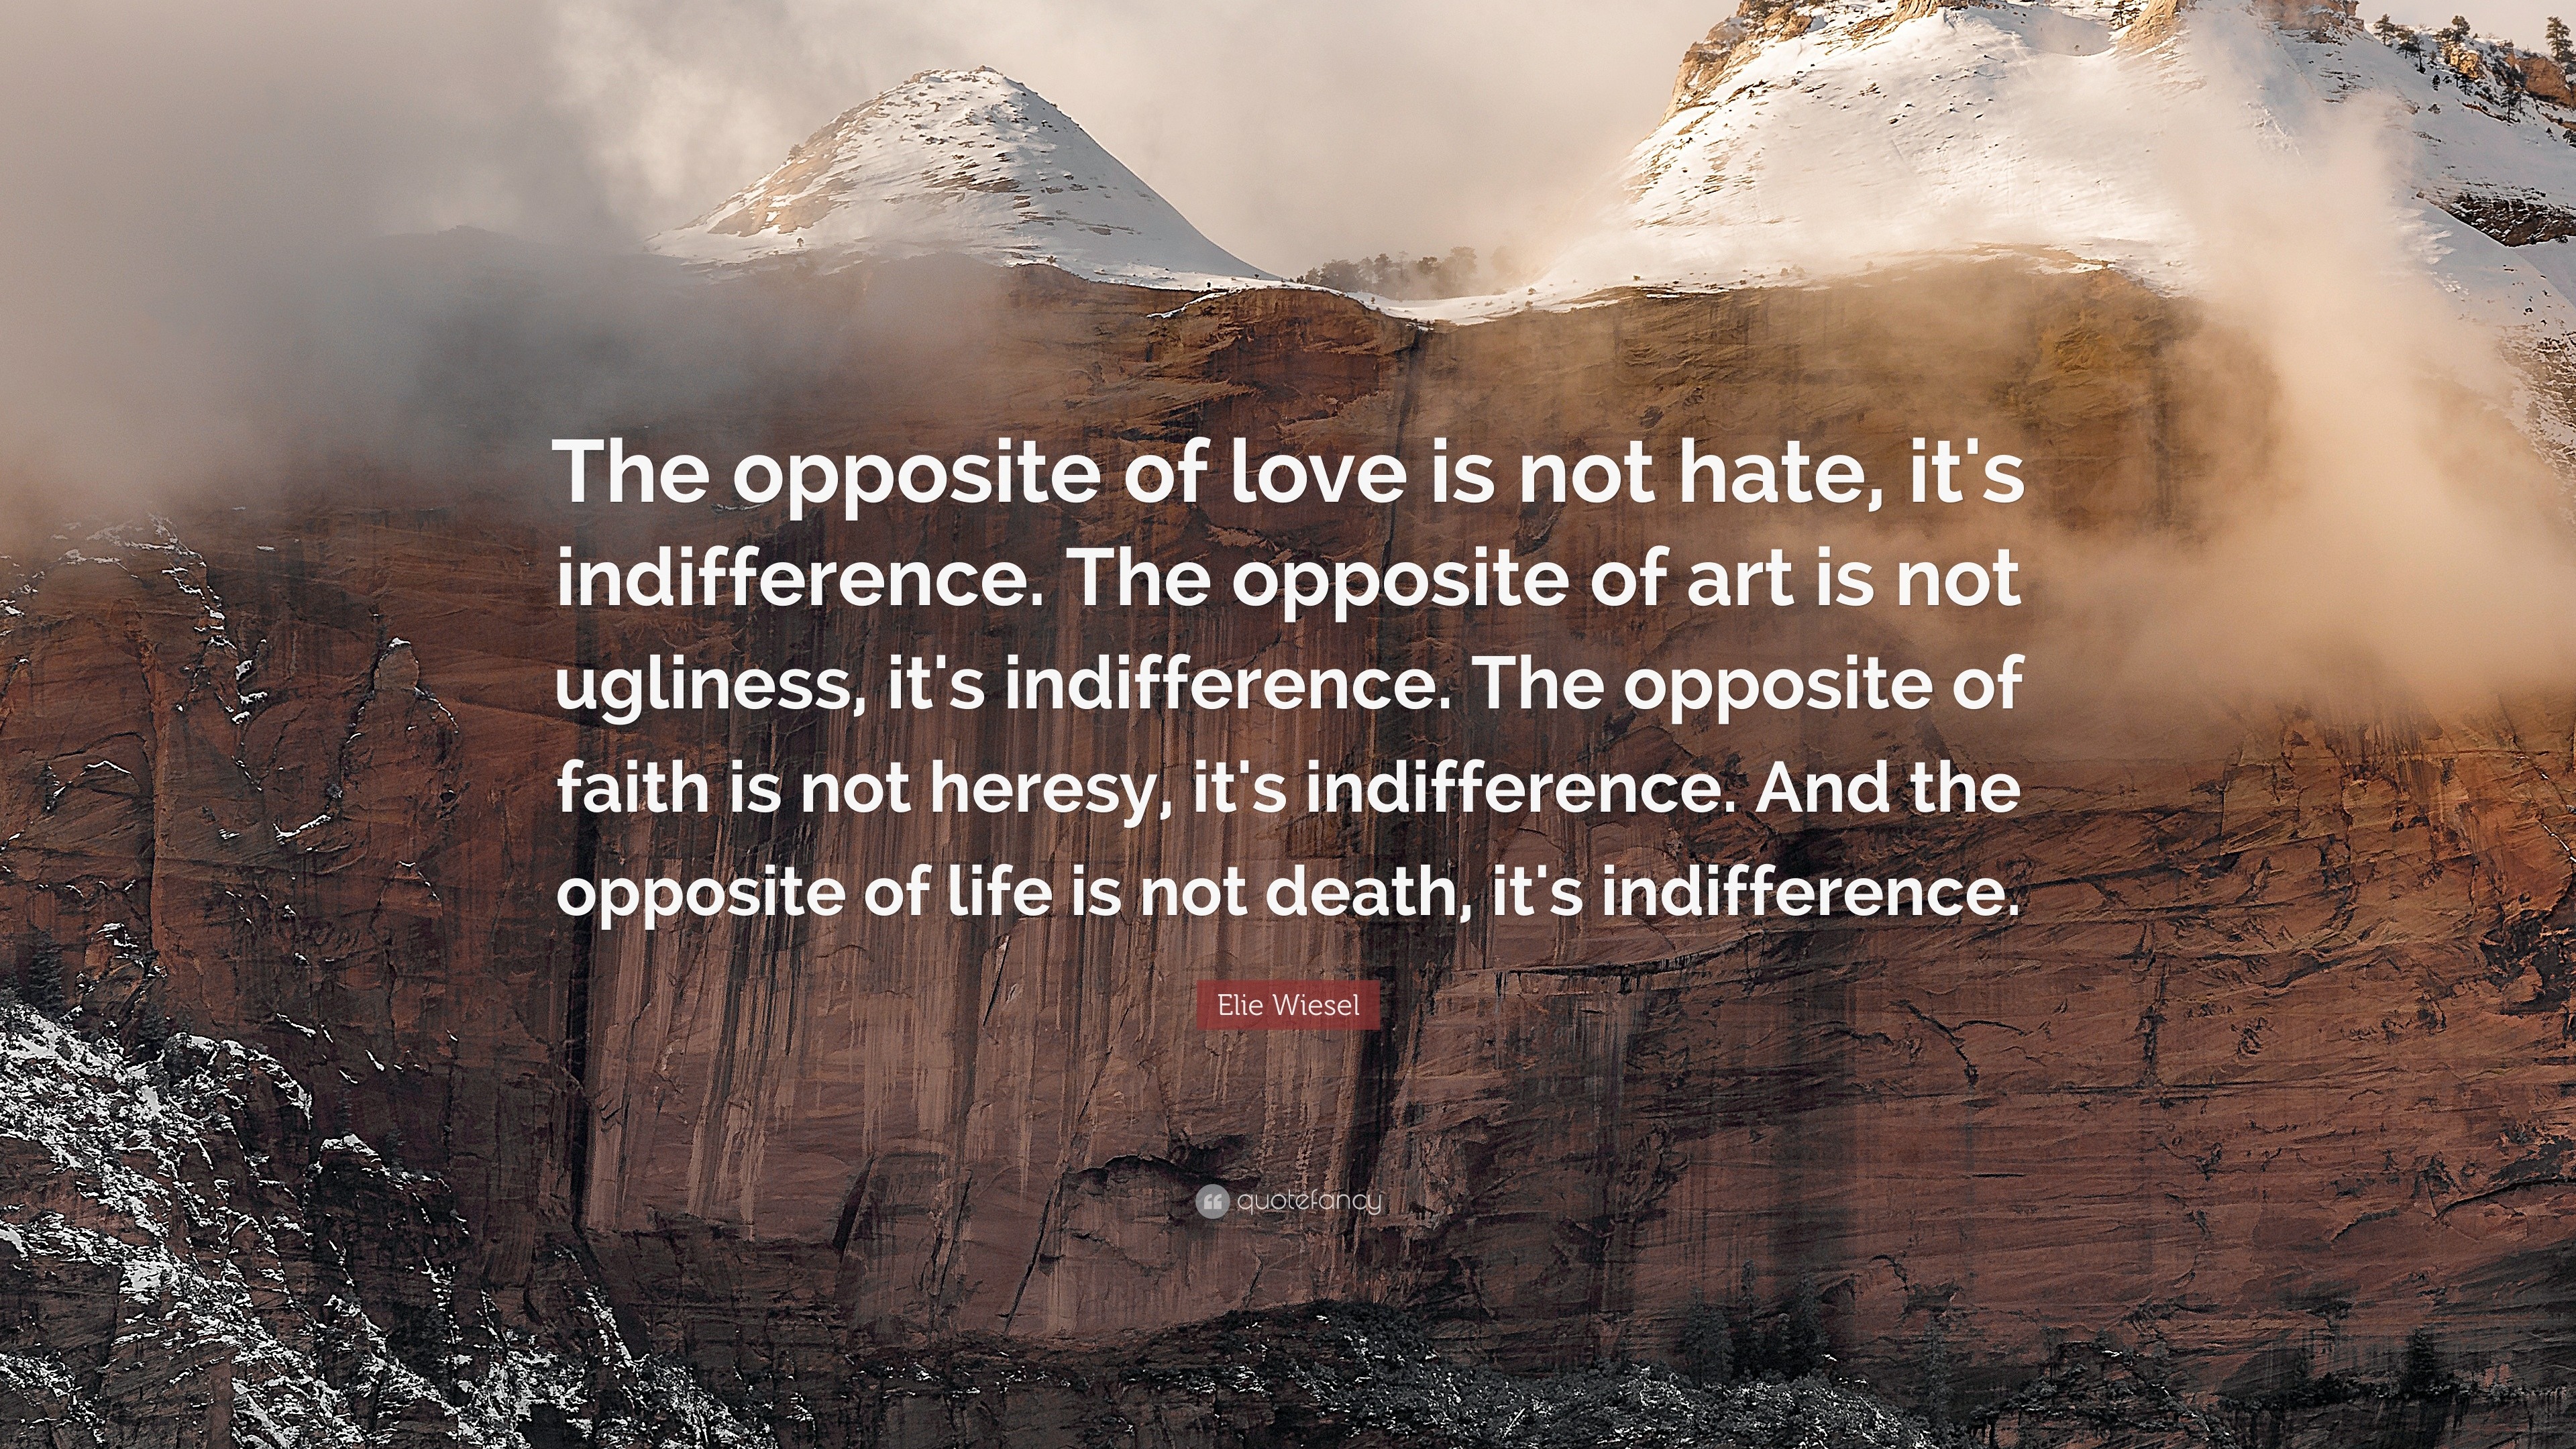 1708645 Elie Wiesel Quote The opposite of love is not hate it s